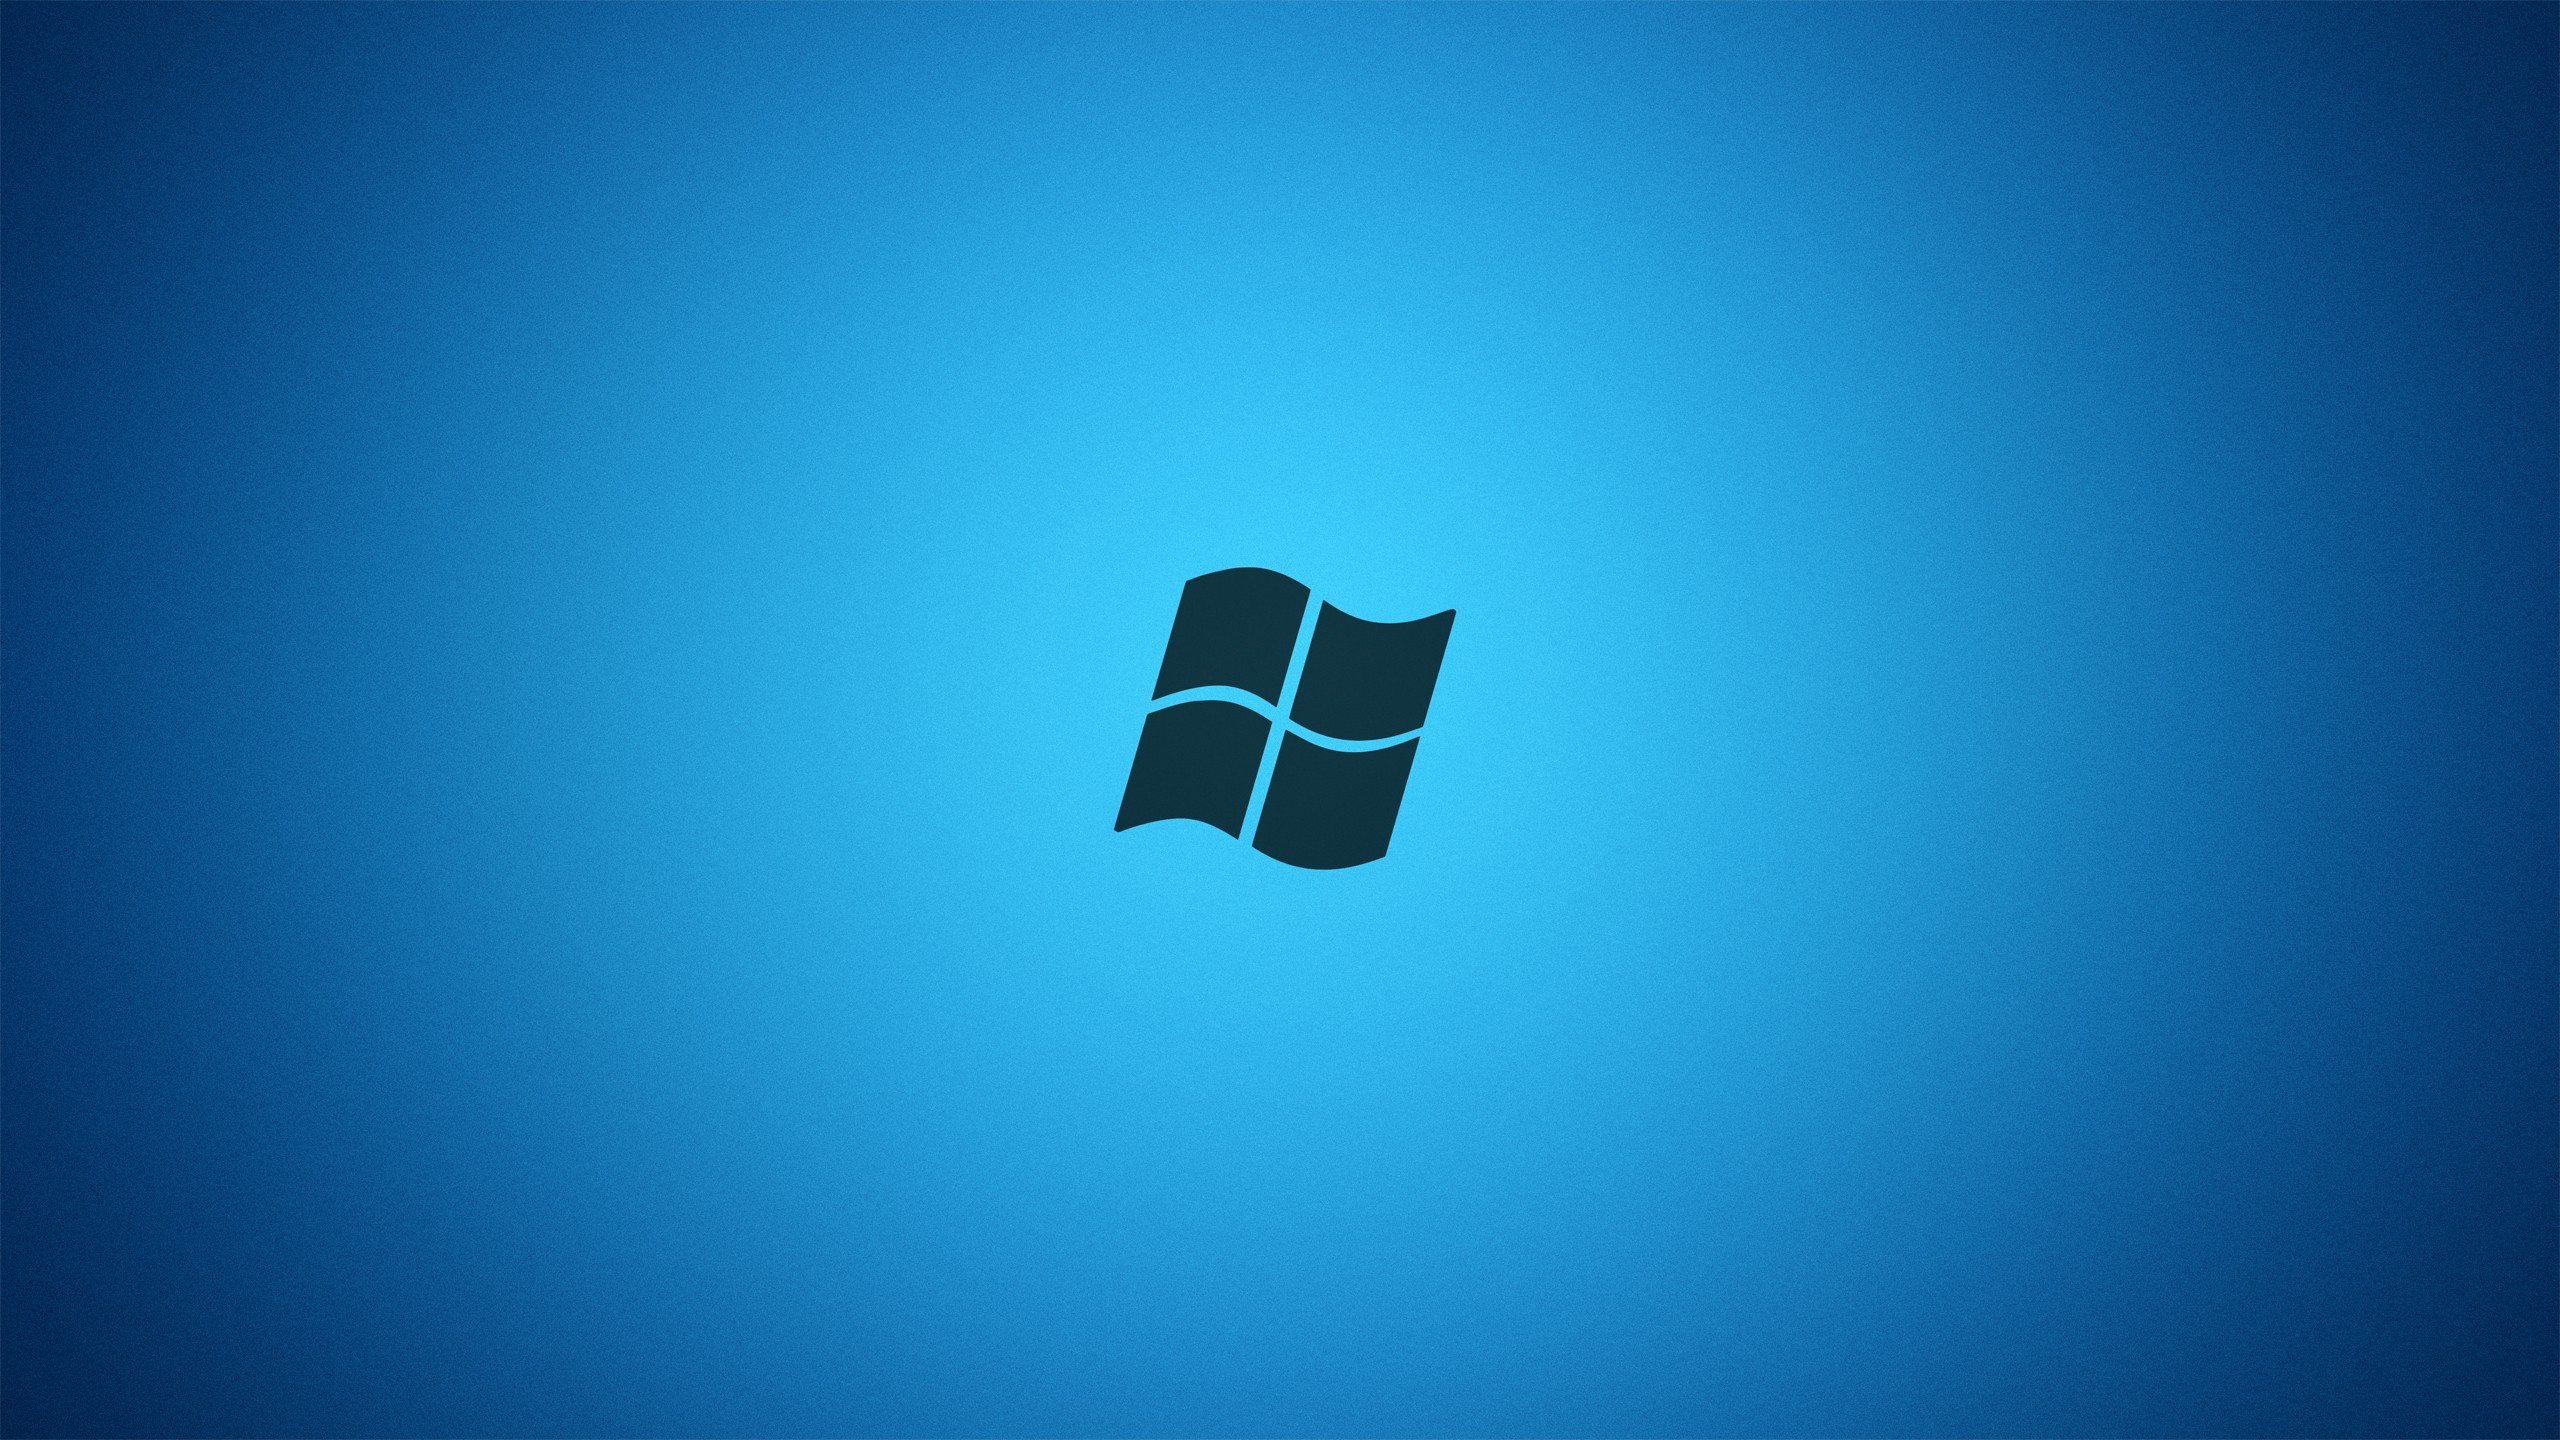 Download Windows 365 Wallpapers 4K Resolution Official